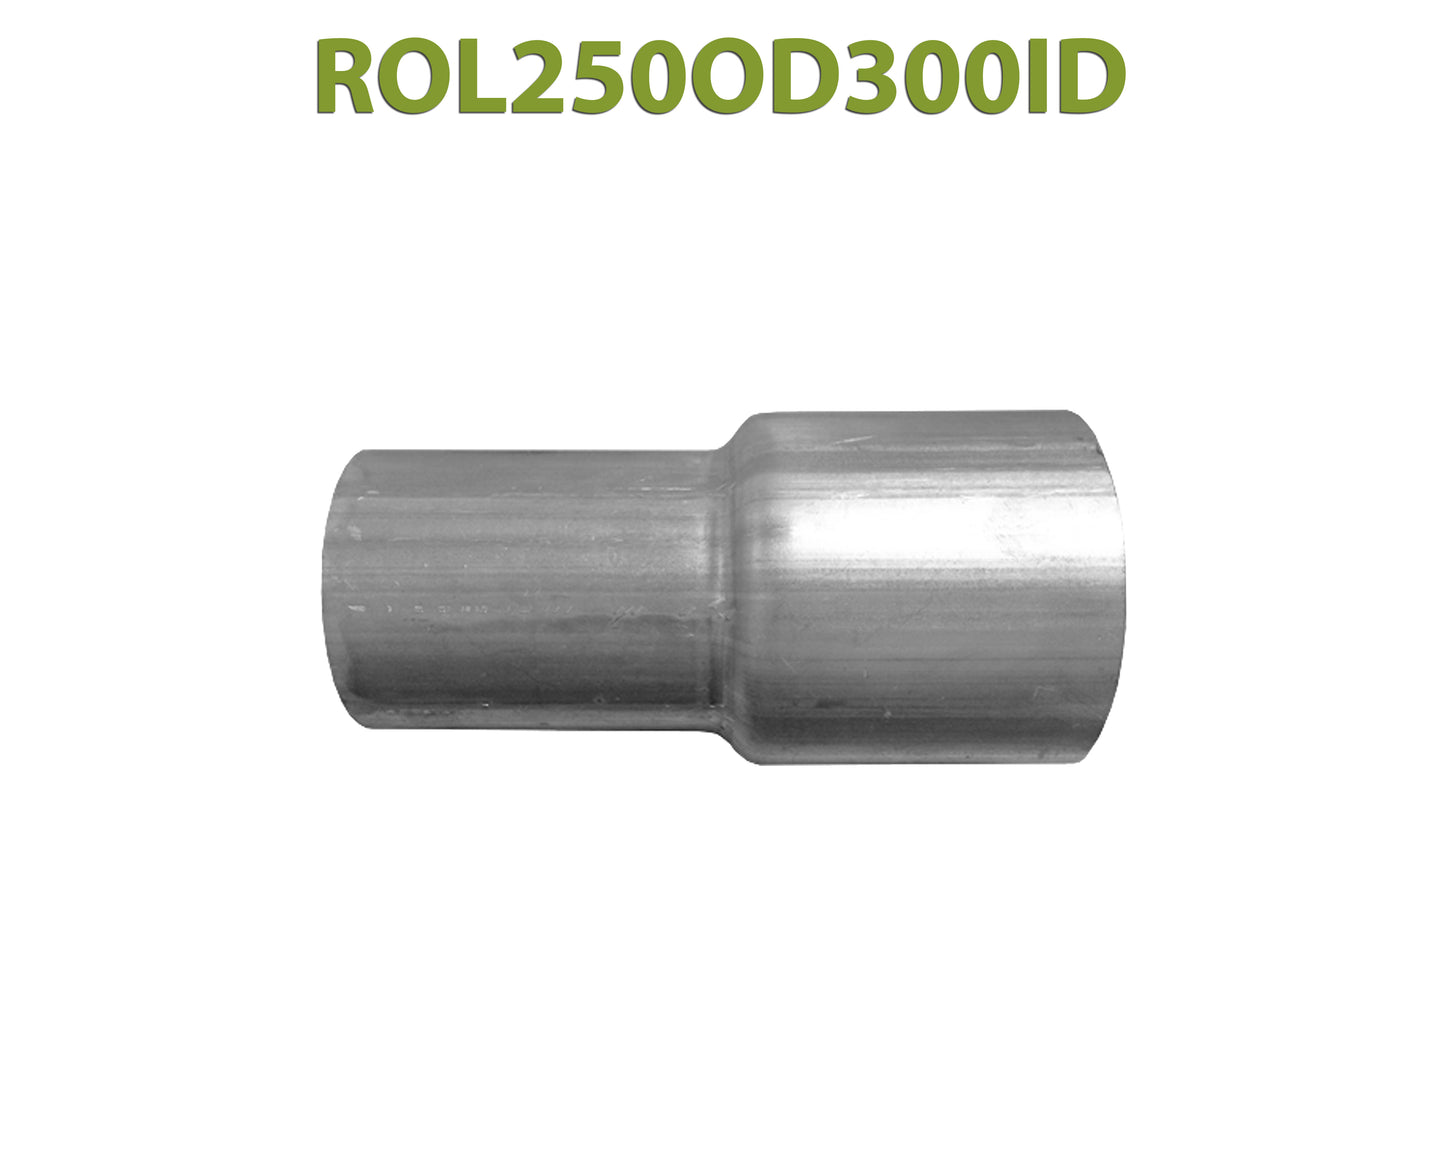 ROL250OD300ID 617571 Exhaust Pipe Adapter Reducer - Connect 2.5" ( 2 1/2 ) ID Pipe to 3" OD Pipe